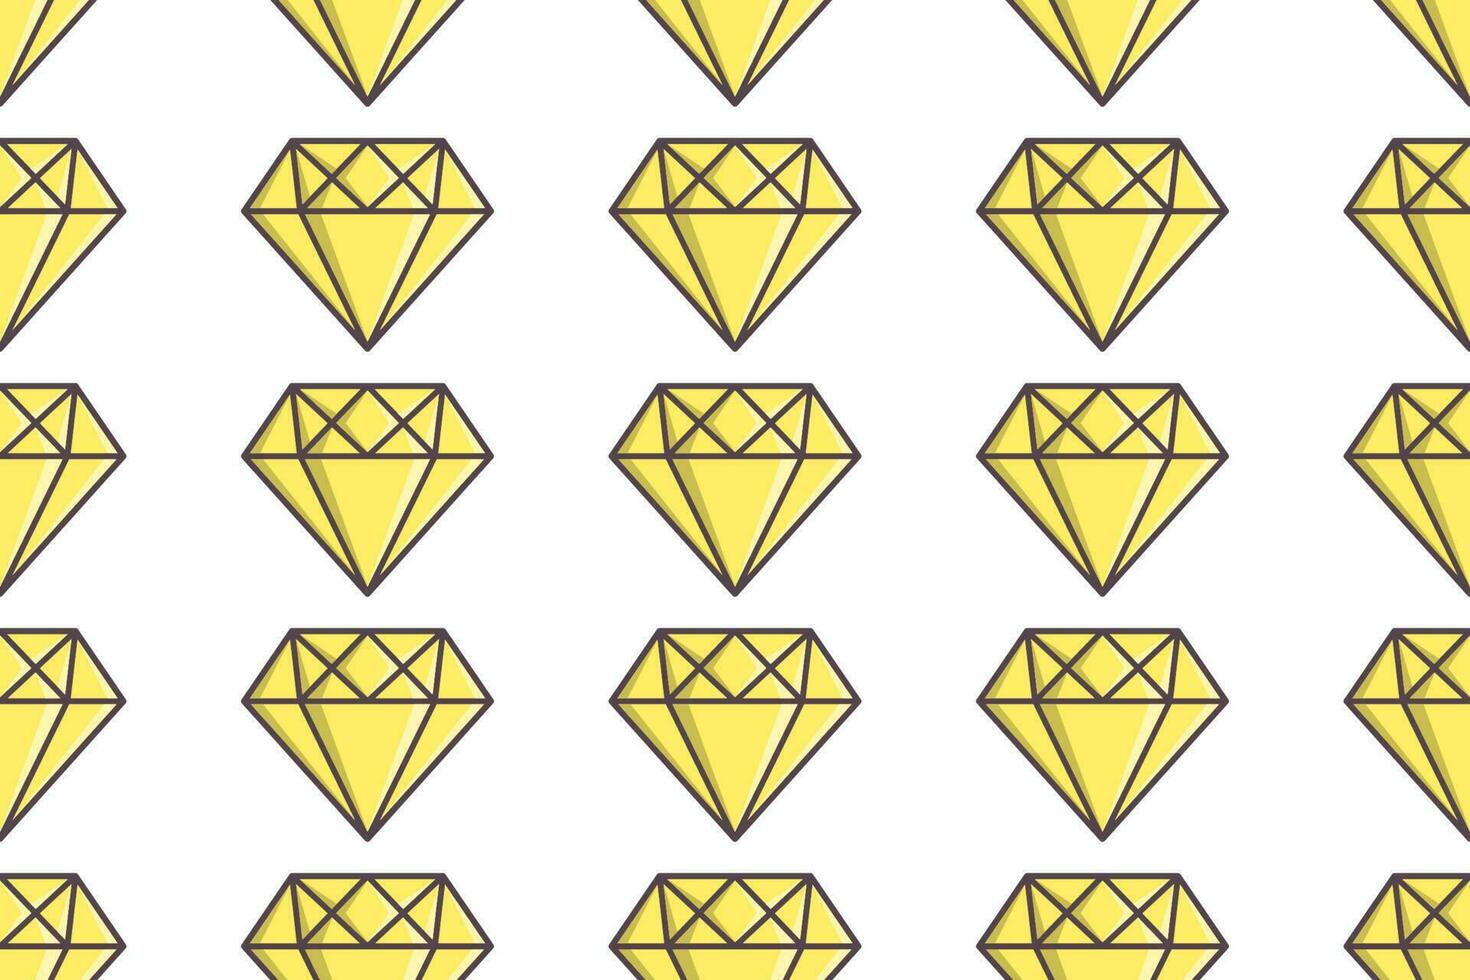 a pattern with yellow and black shapes on it vector